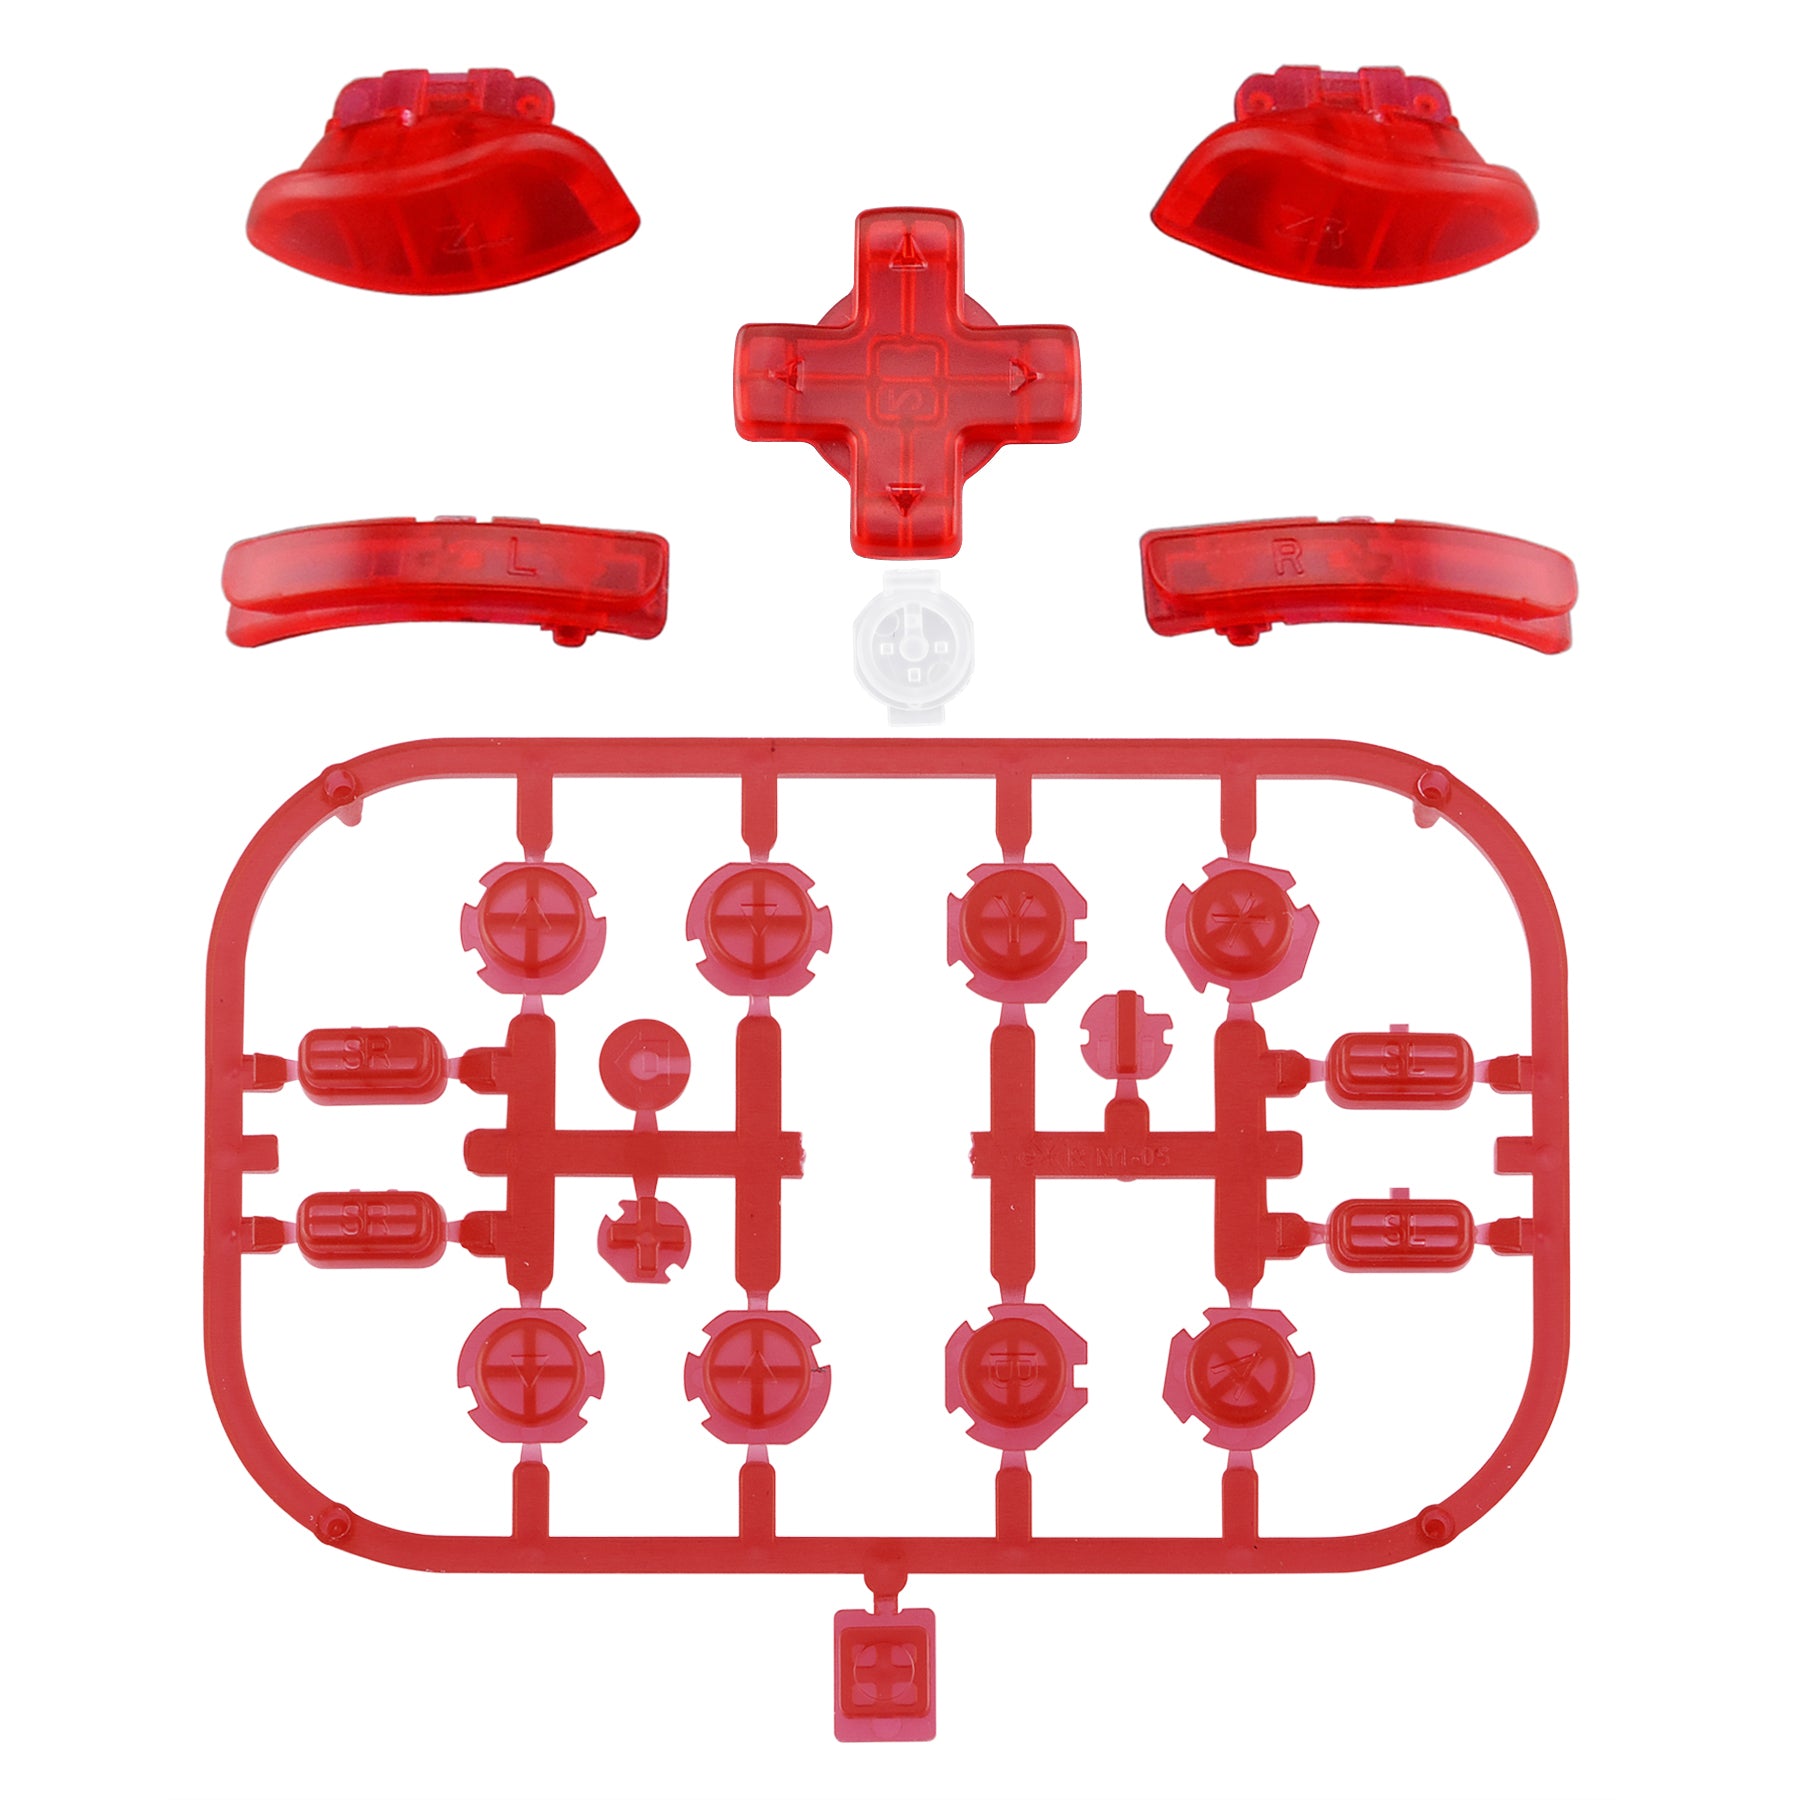 eXtremeRate Dpad Version Replacement Full Set Buttons for Joycon of Switch (D-pad ONLY Fits for eXtremeRate D-pad Shell for Joycon) - Transparent Clear Red eXtremeRate